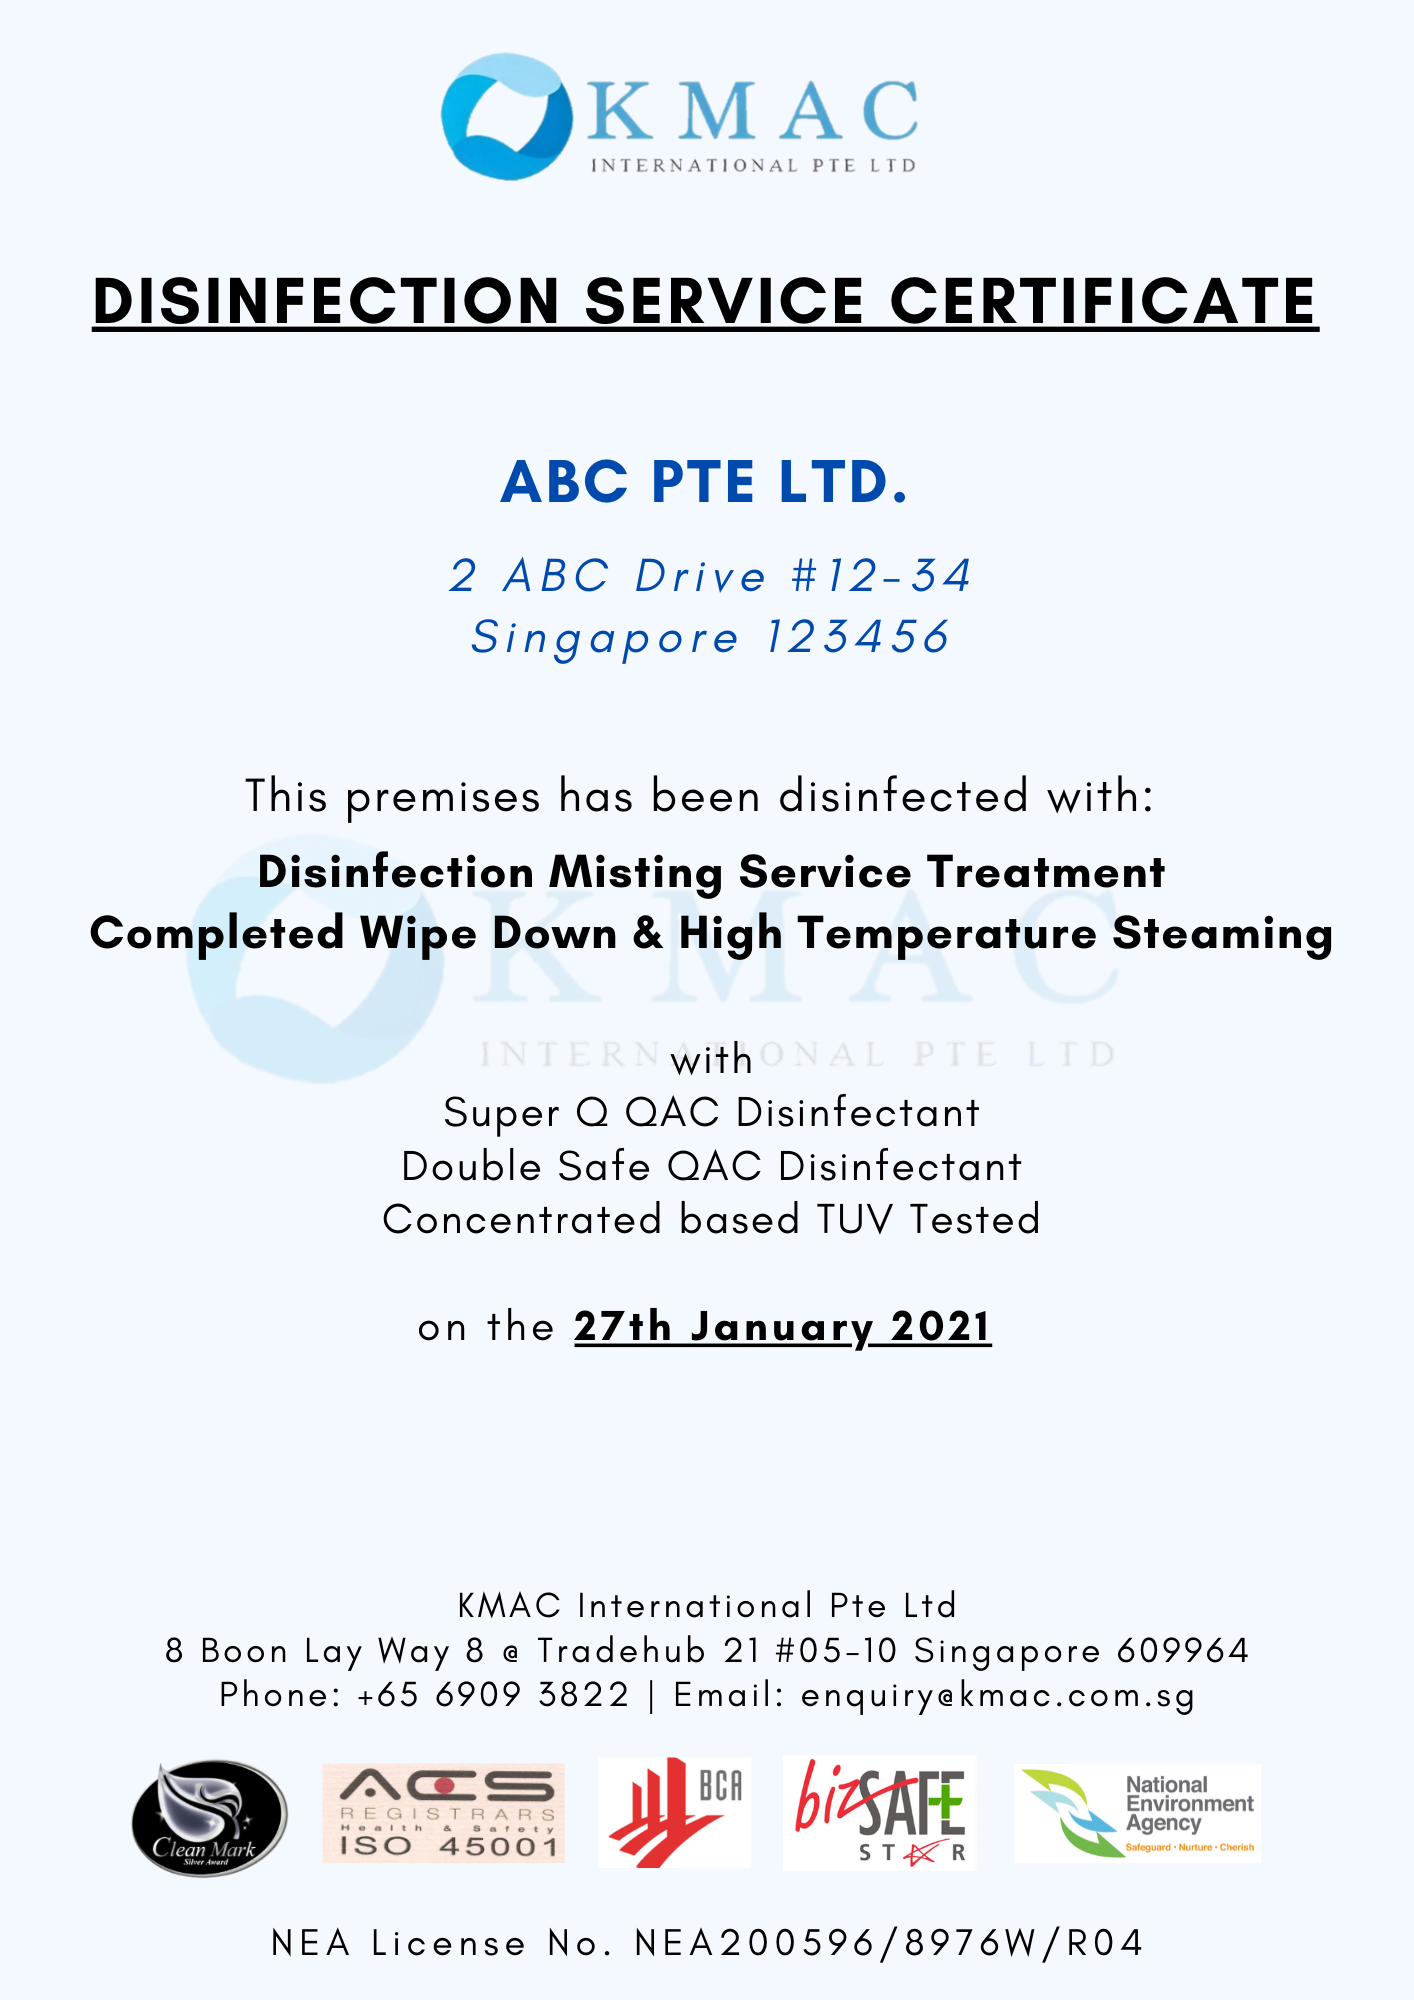 https://kmac.com.sg/wp-content/uploads/2021/08/Sample-of-Disinfection-Service-Certificate-1414x2000.png